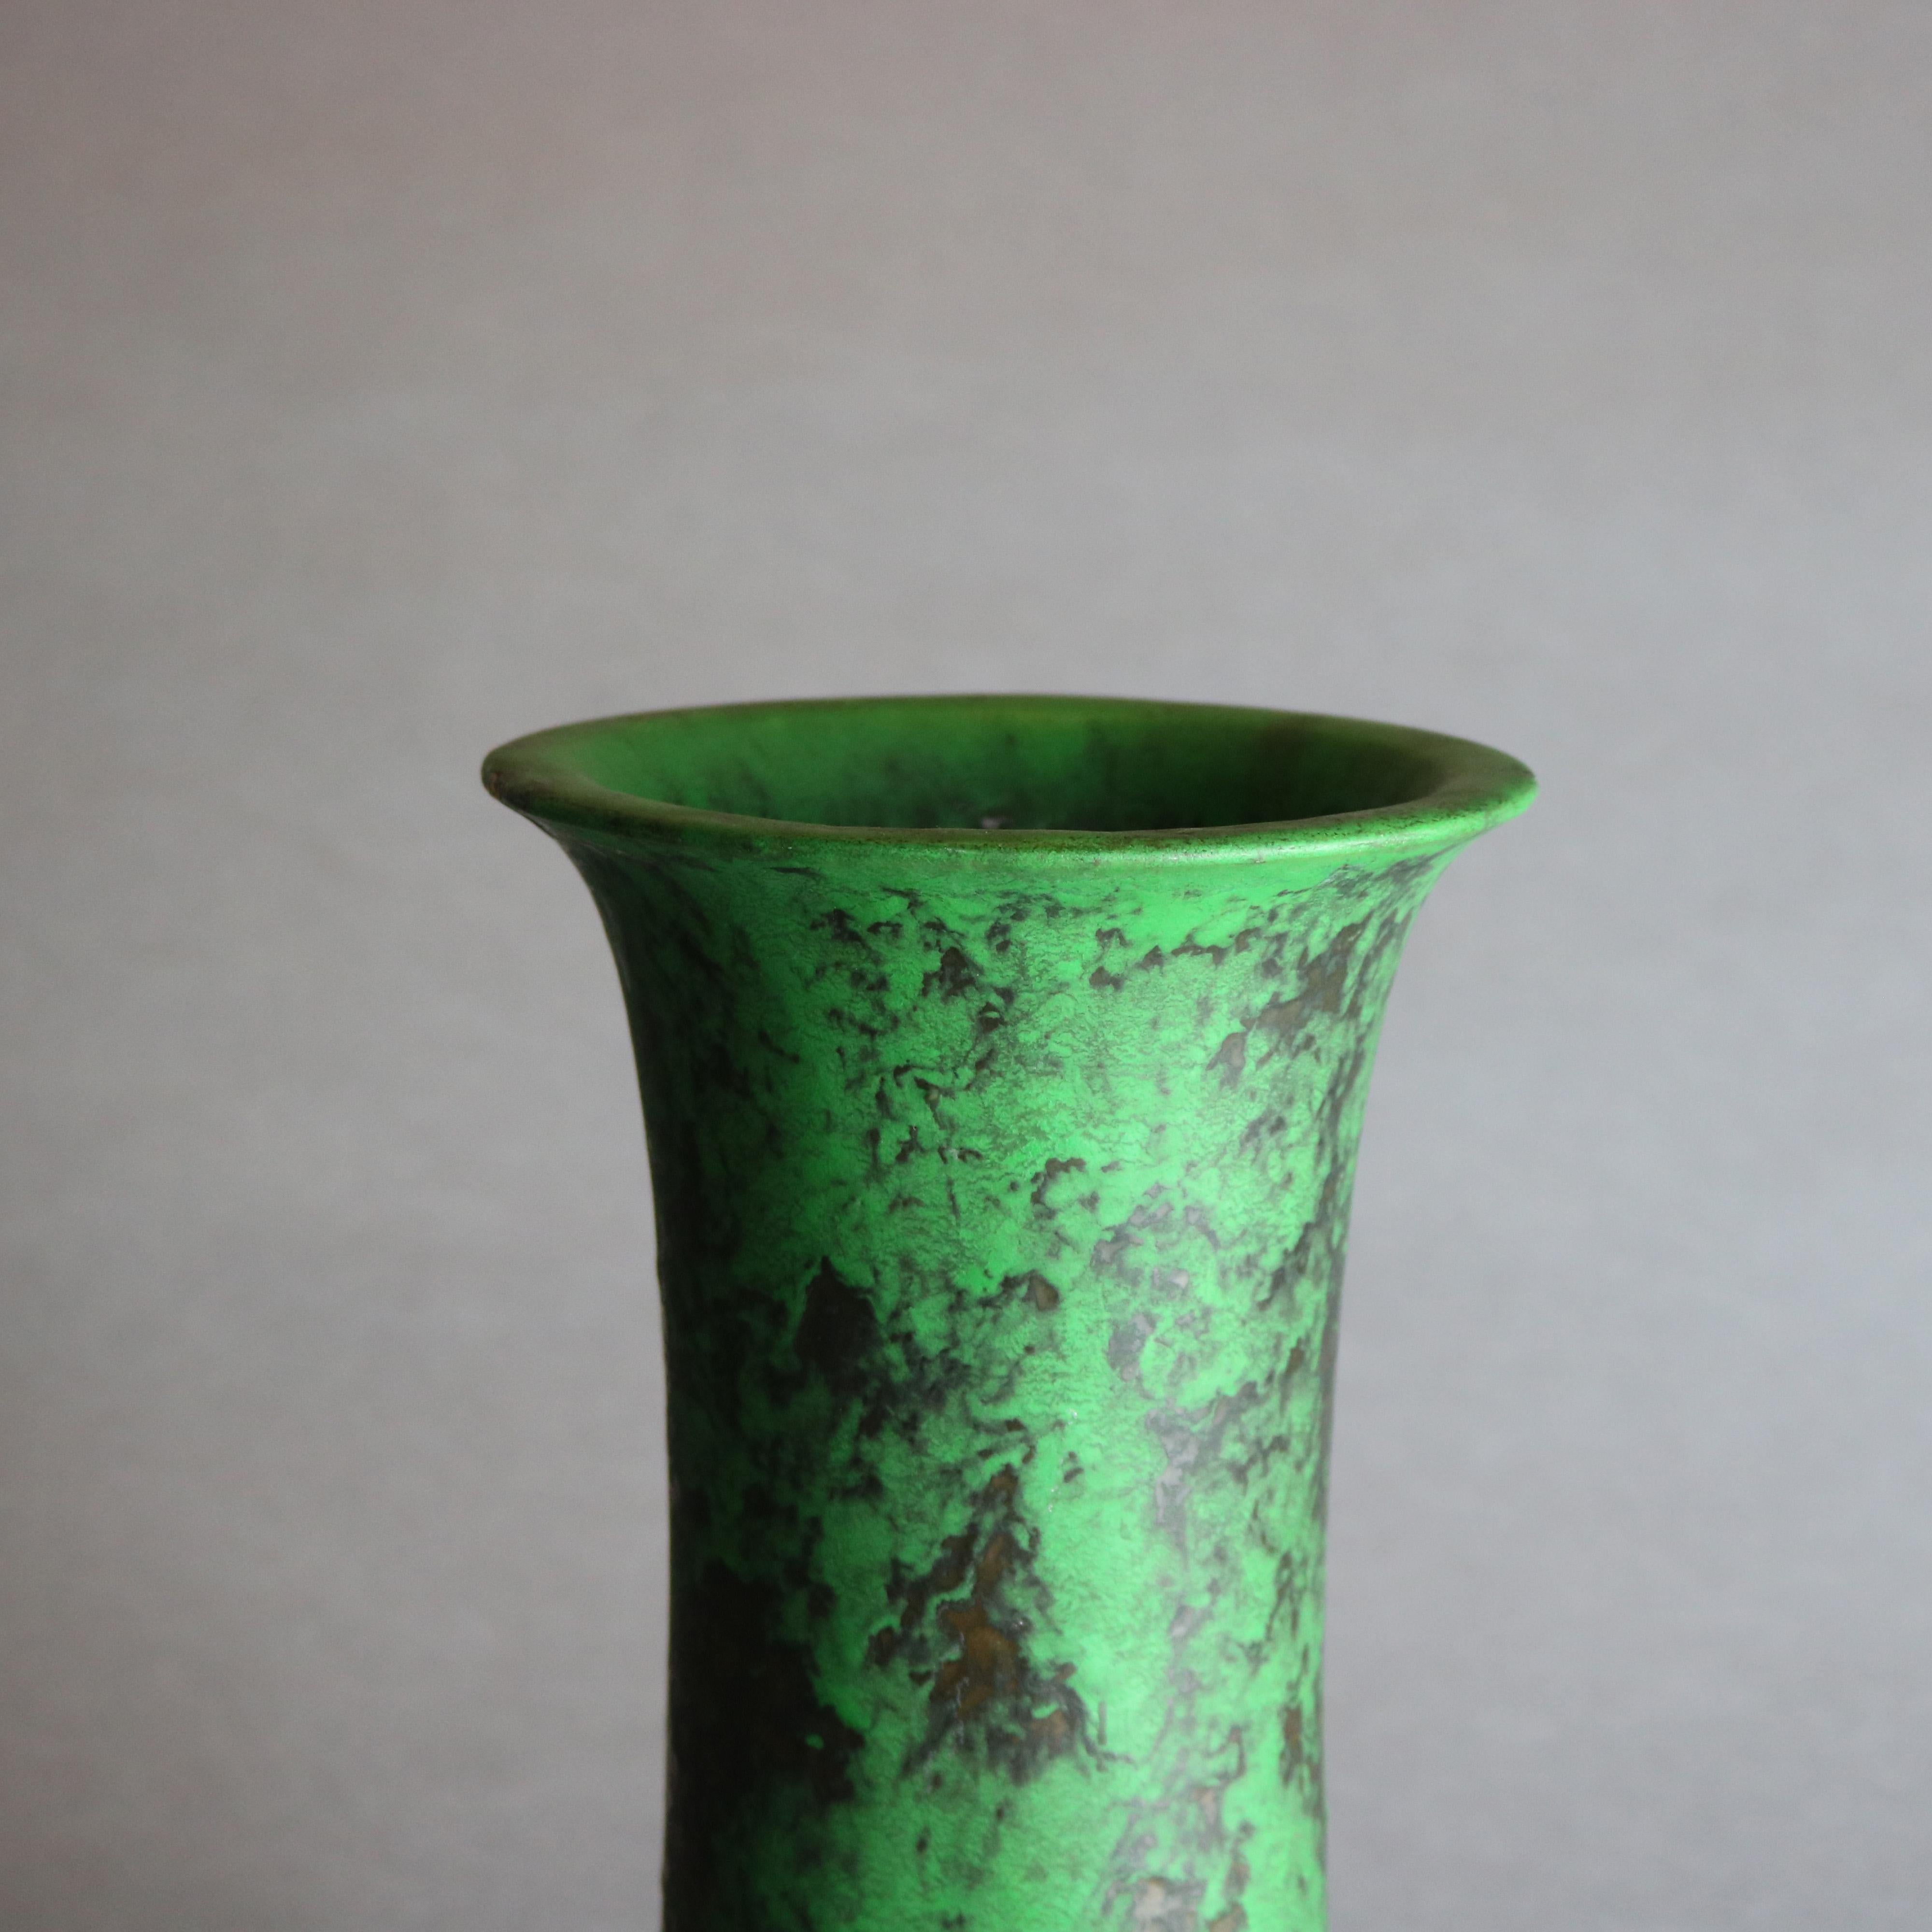 An antique Arts & Crafts art pottery vase by Weller offers cylindrical form with flared mouth and 
Coppertone glaze, signed on base as photographed, c1920

Measures: 12.5